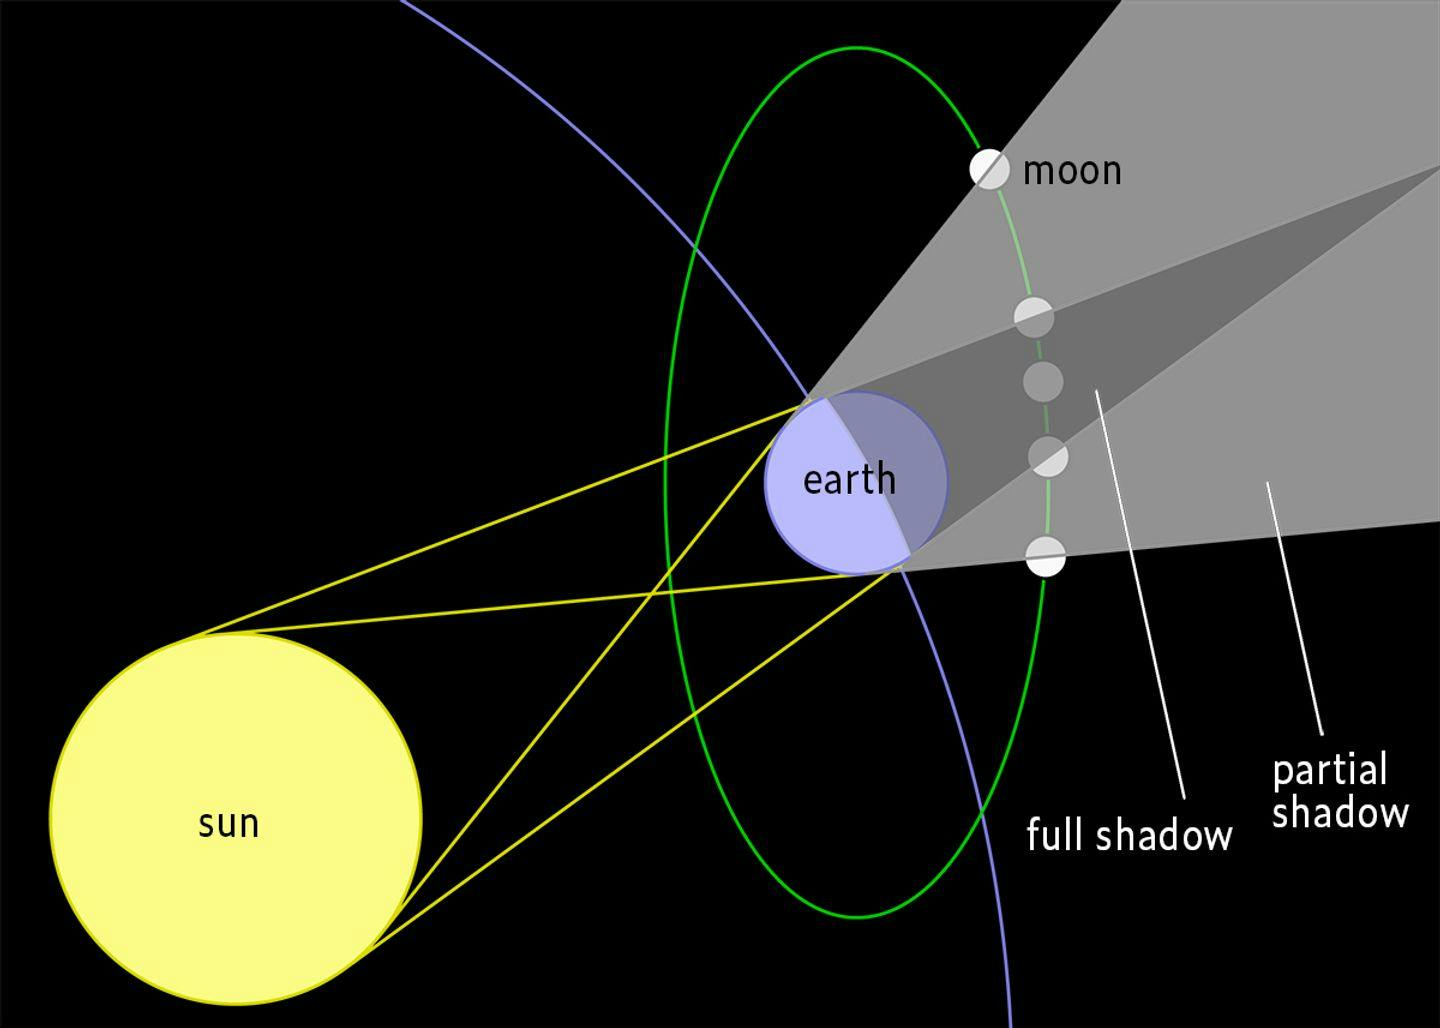 A lunar eclipse. Image: Based on Wikipedia